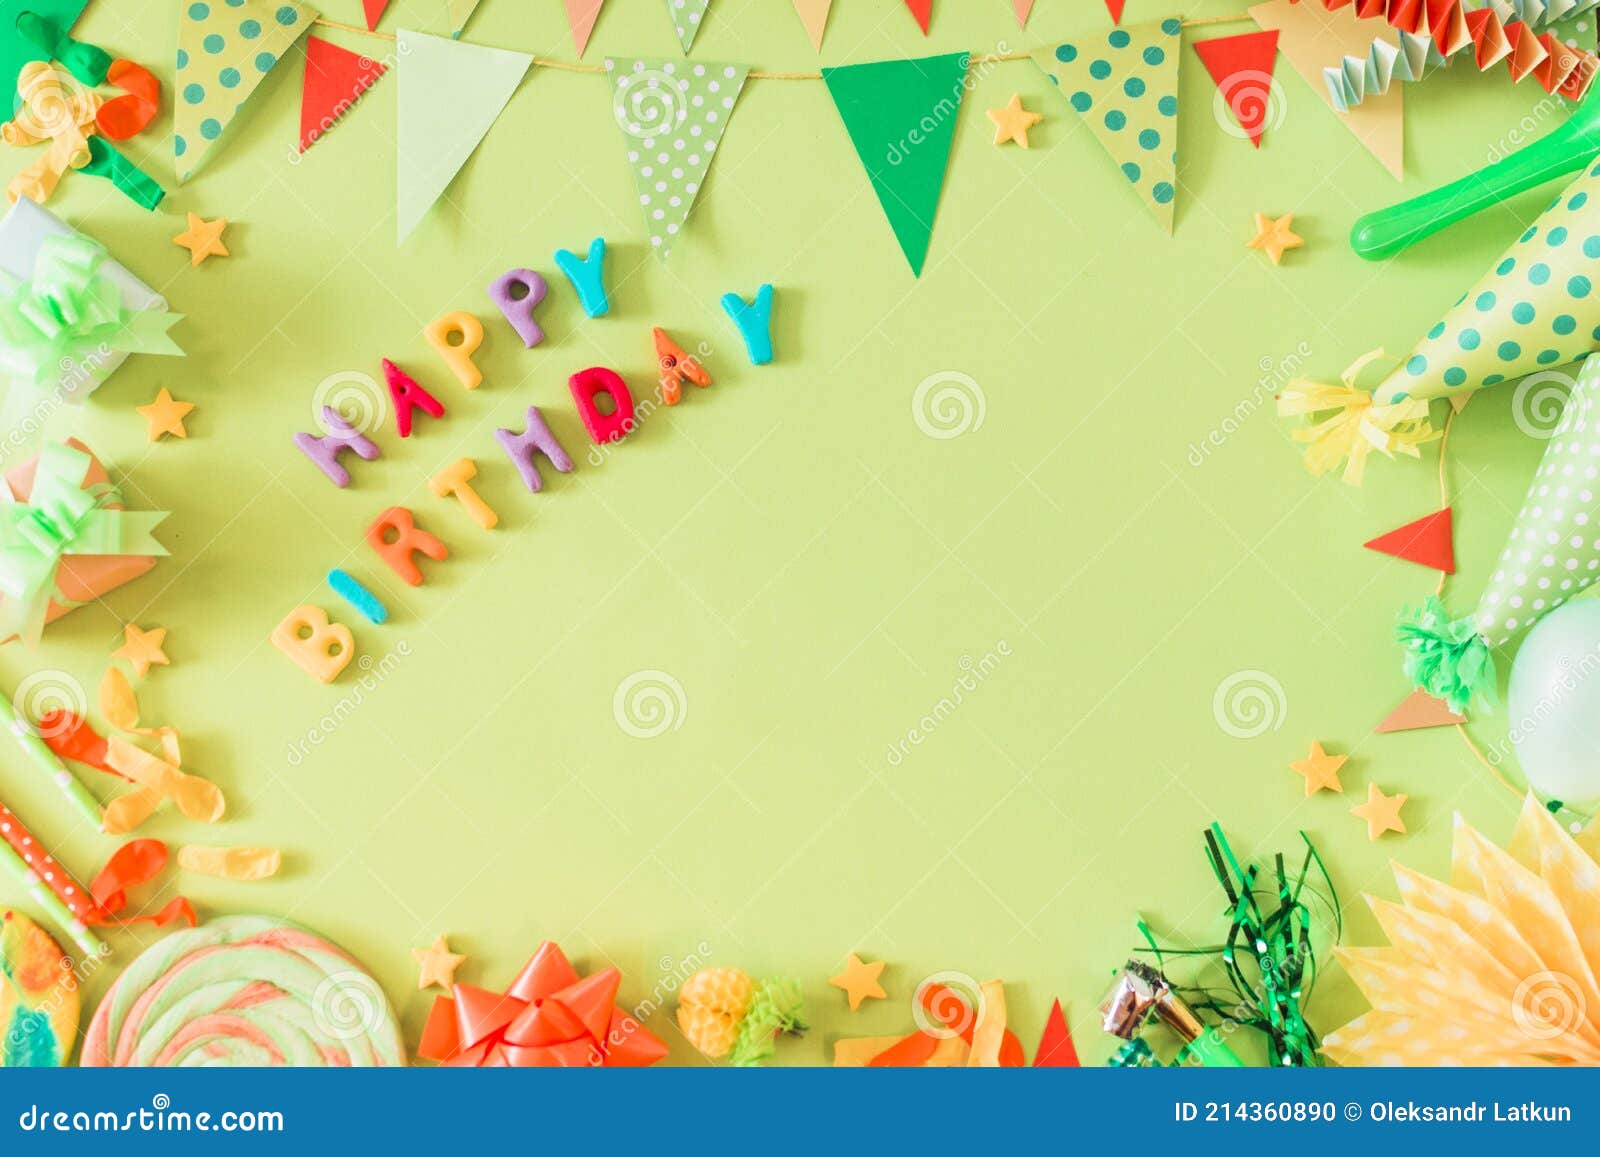 Happy Birthday Background Images HD Pictures and Wallpaper For Free  Download  Pngtree